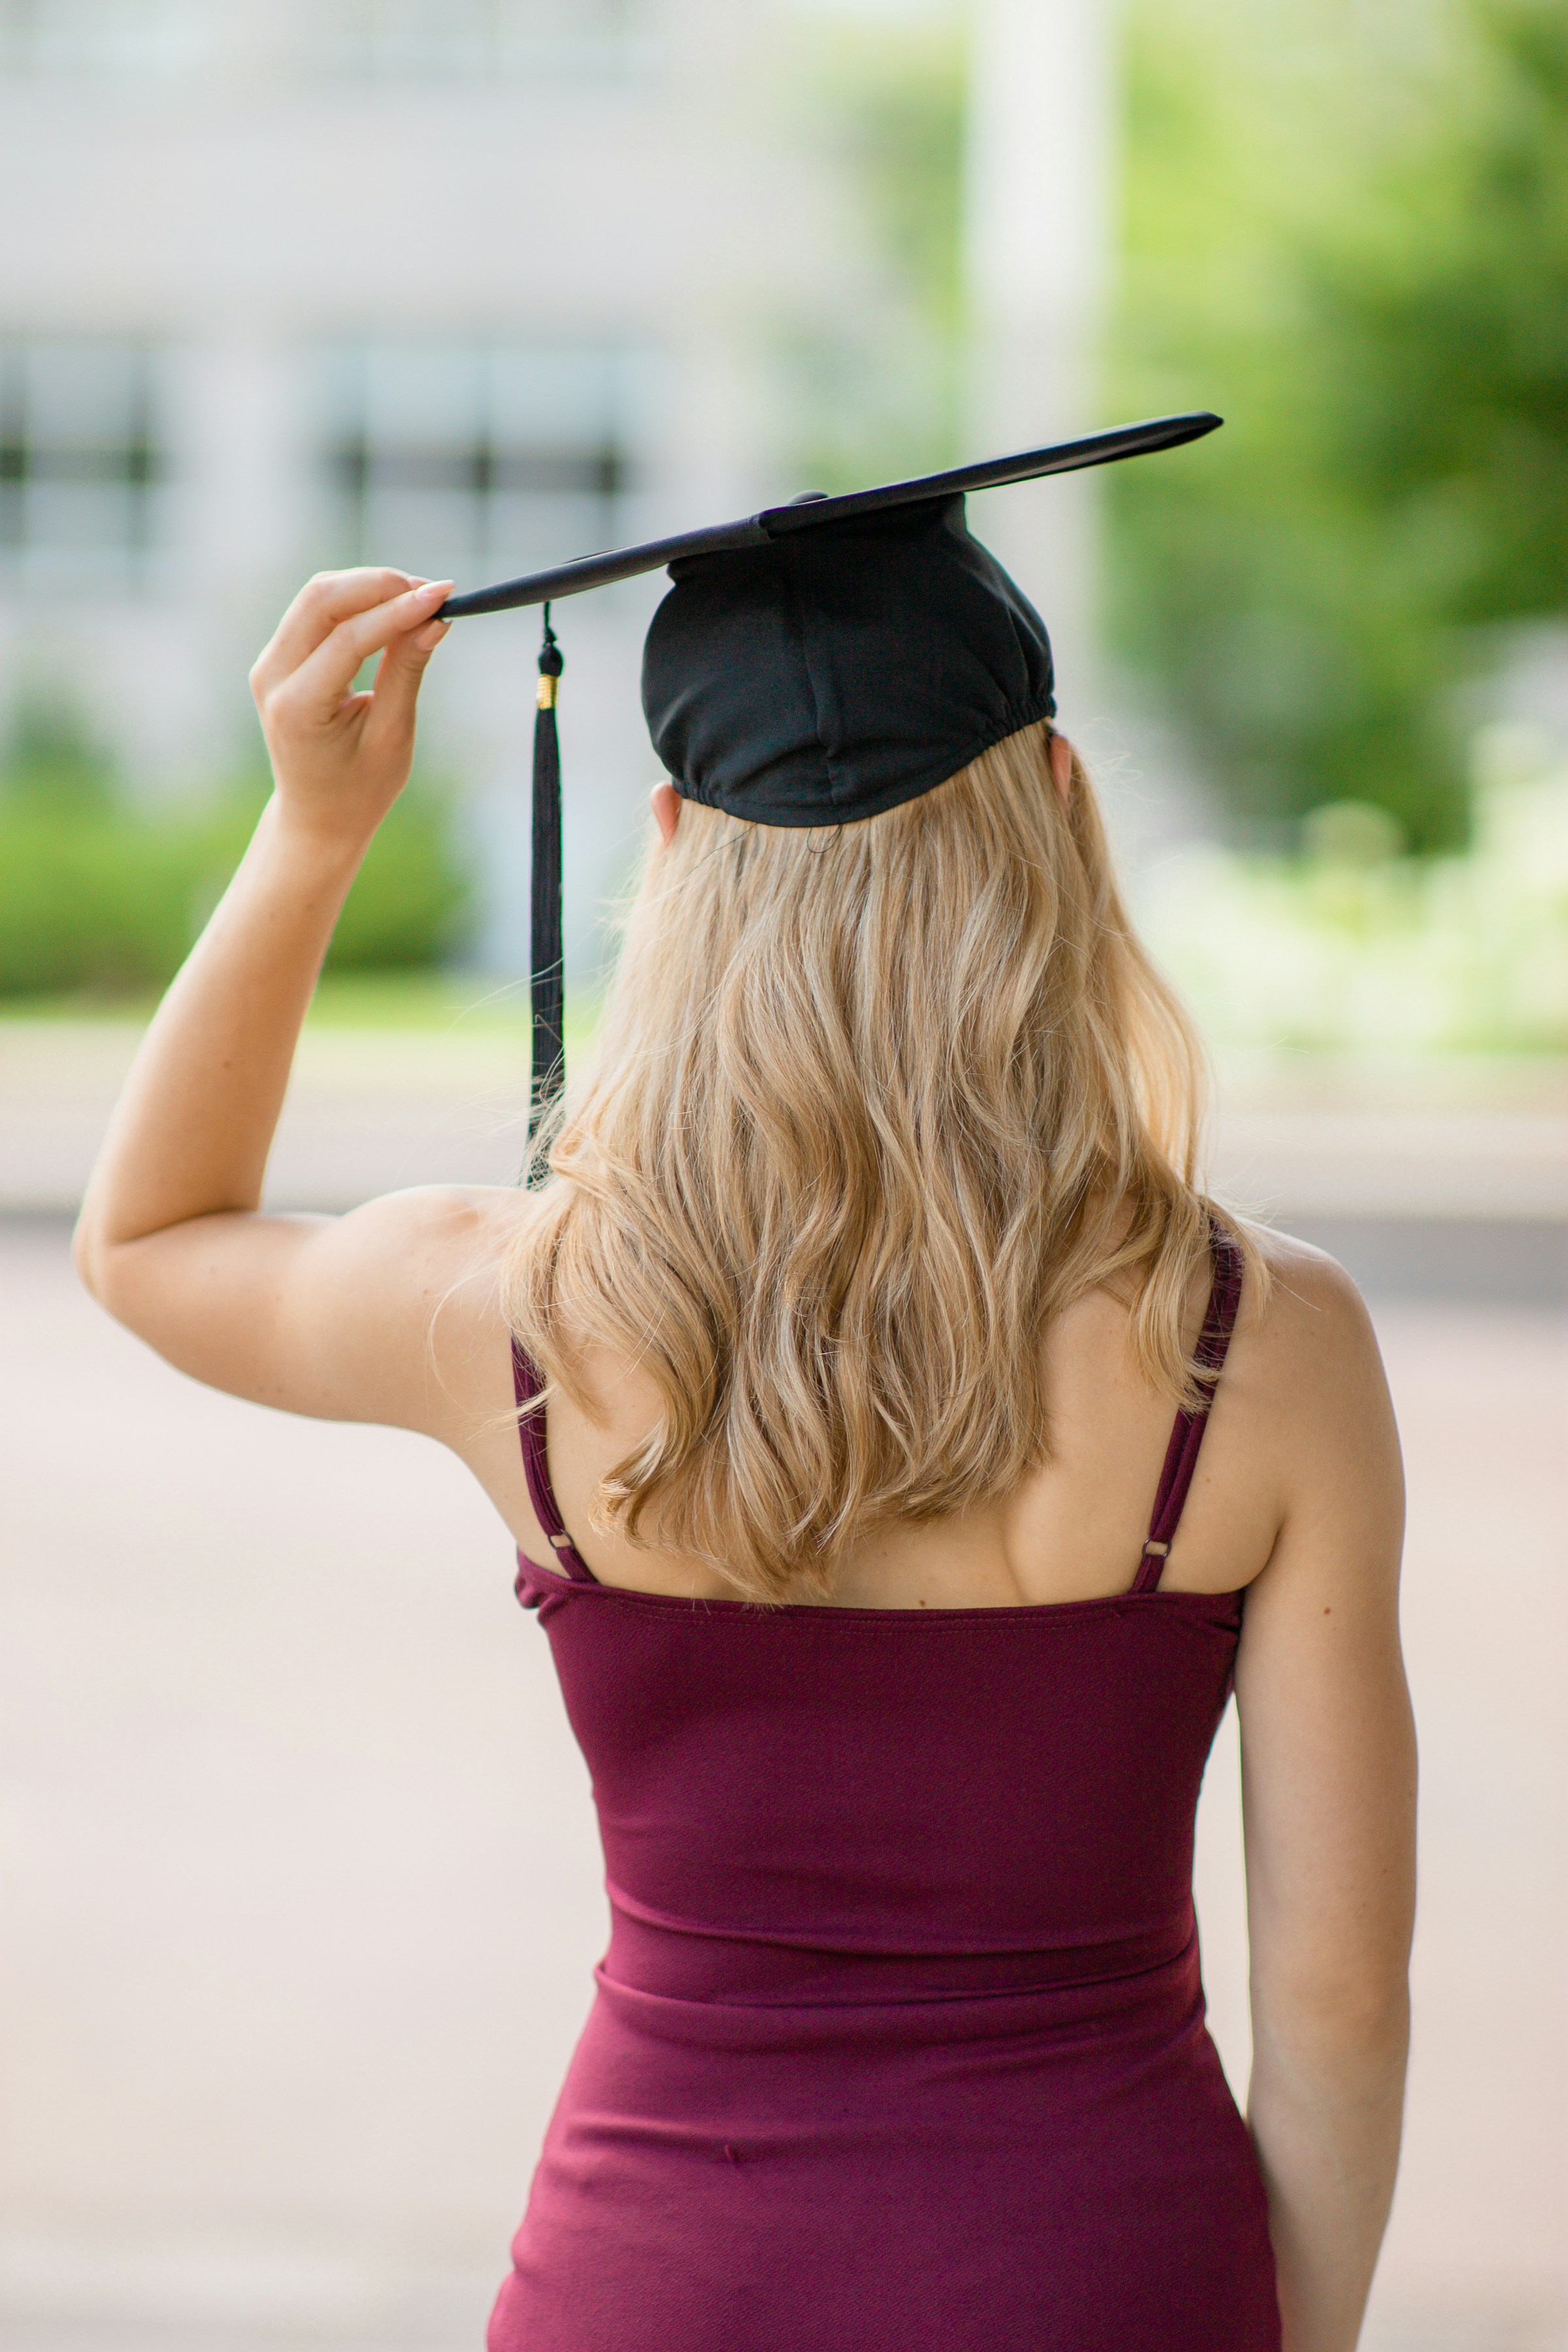 A young woman holding back mortar board during daytime | Source: Unsplash